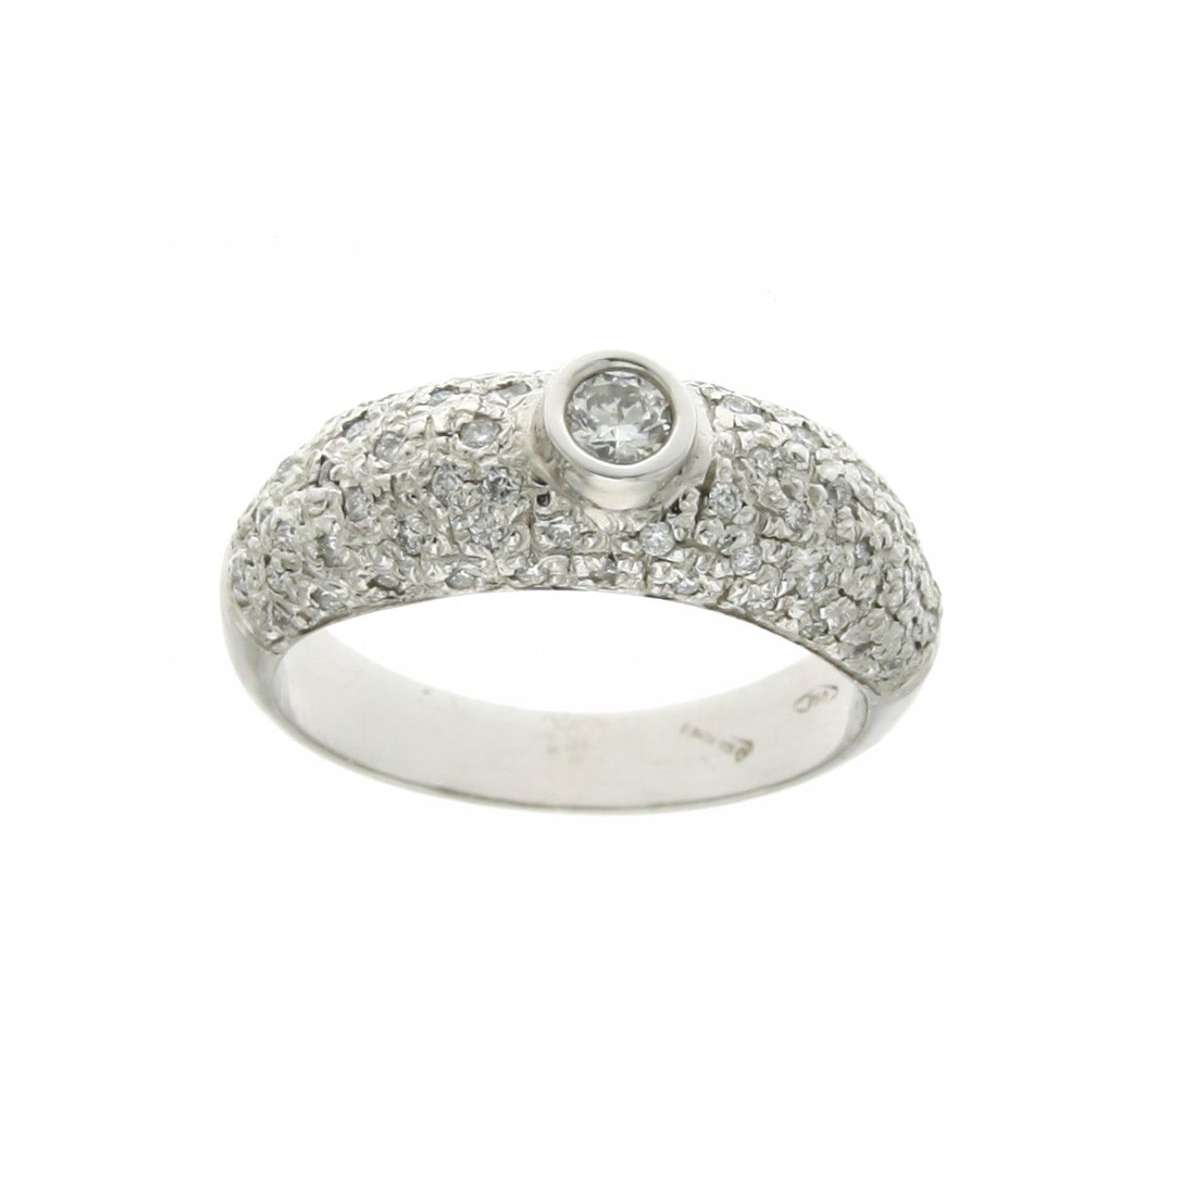 White gold solitaire ring with pave diamonds 0.47 carats G Color - VS1 Clarity